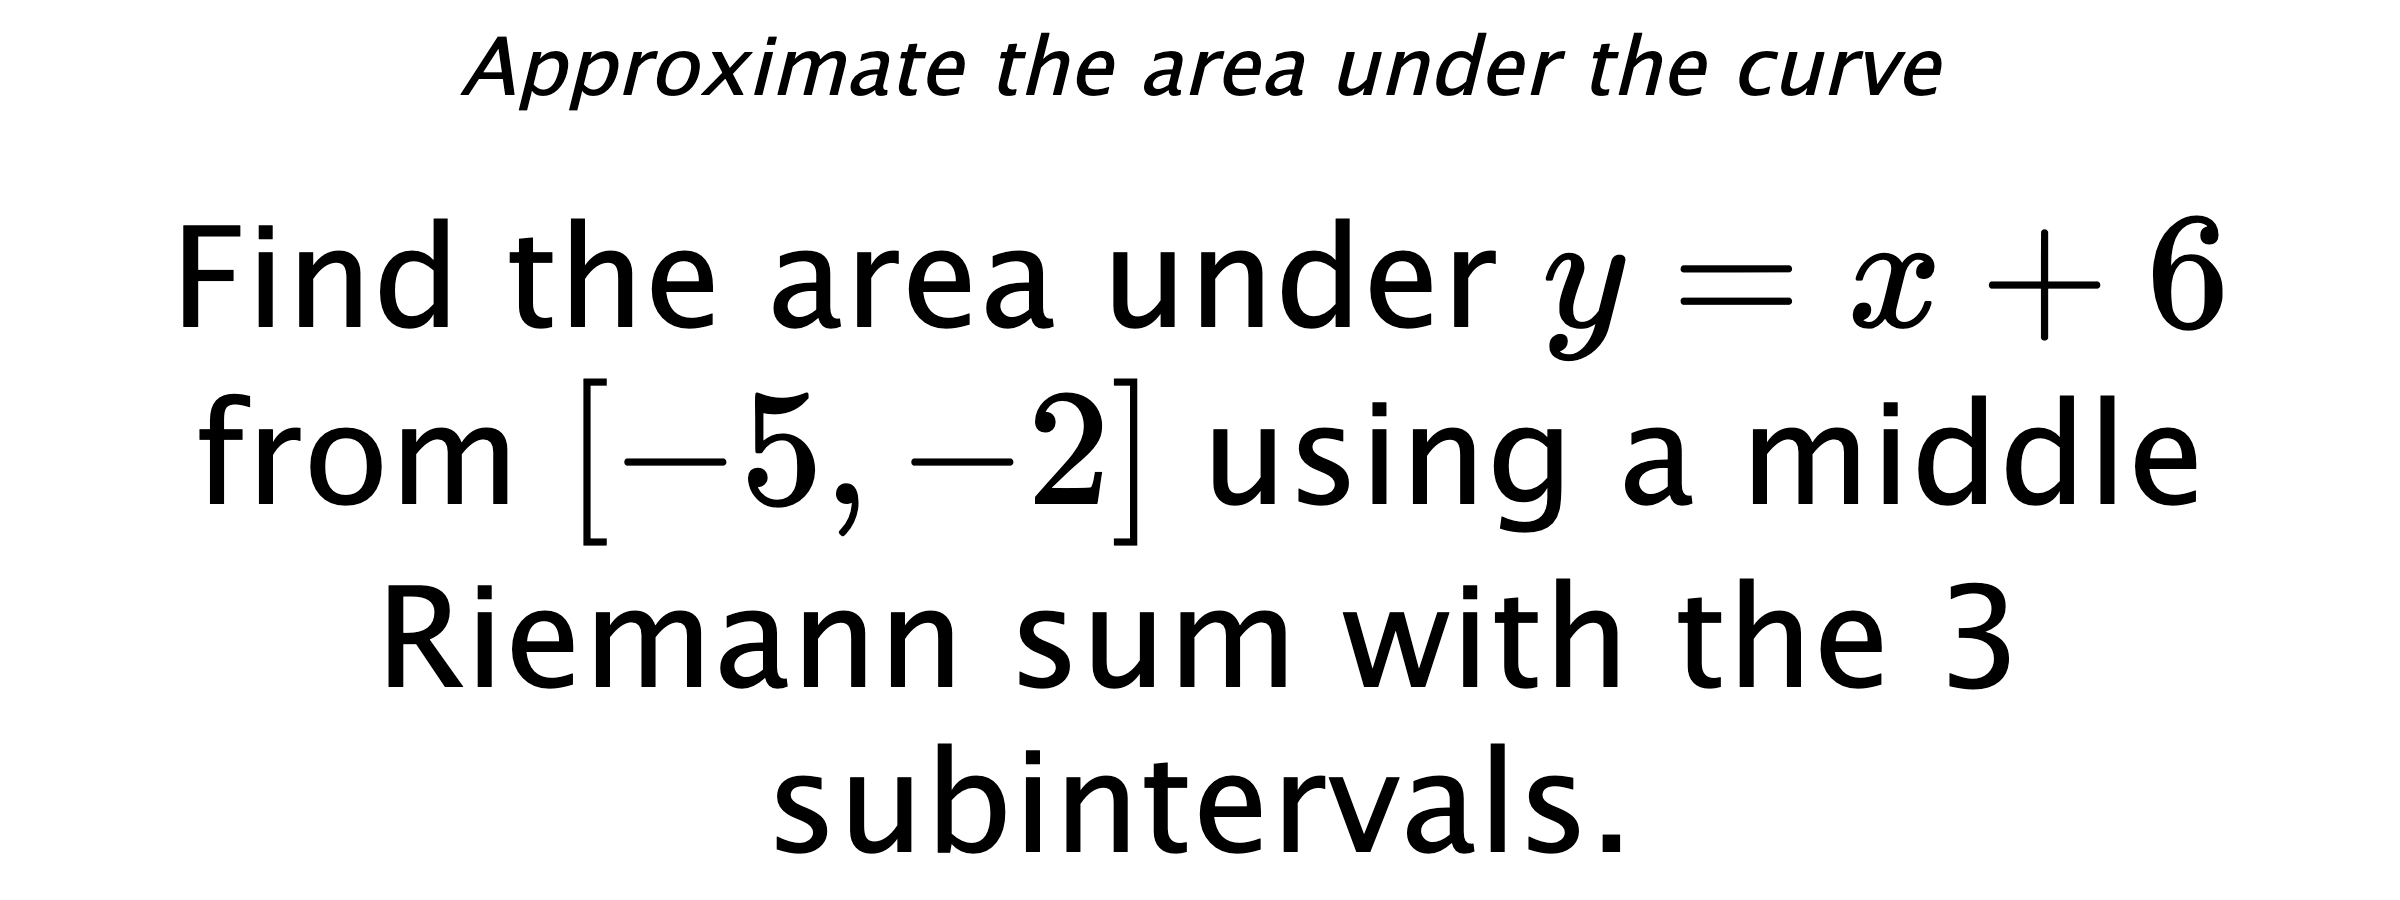 Approximate the area under the curve Find the area under $ y=x+6 $ from $ [-5,-2] $ using a middle Riemann sum with the 3 subintervals.